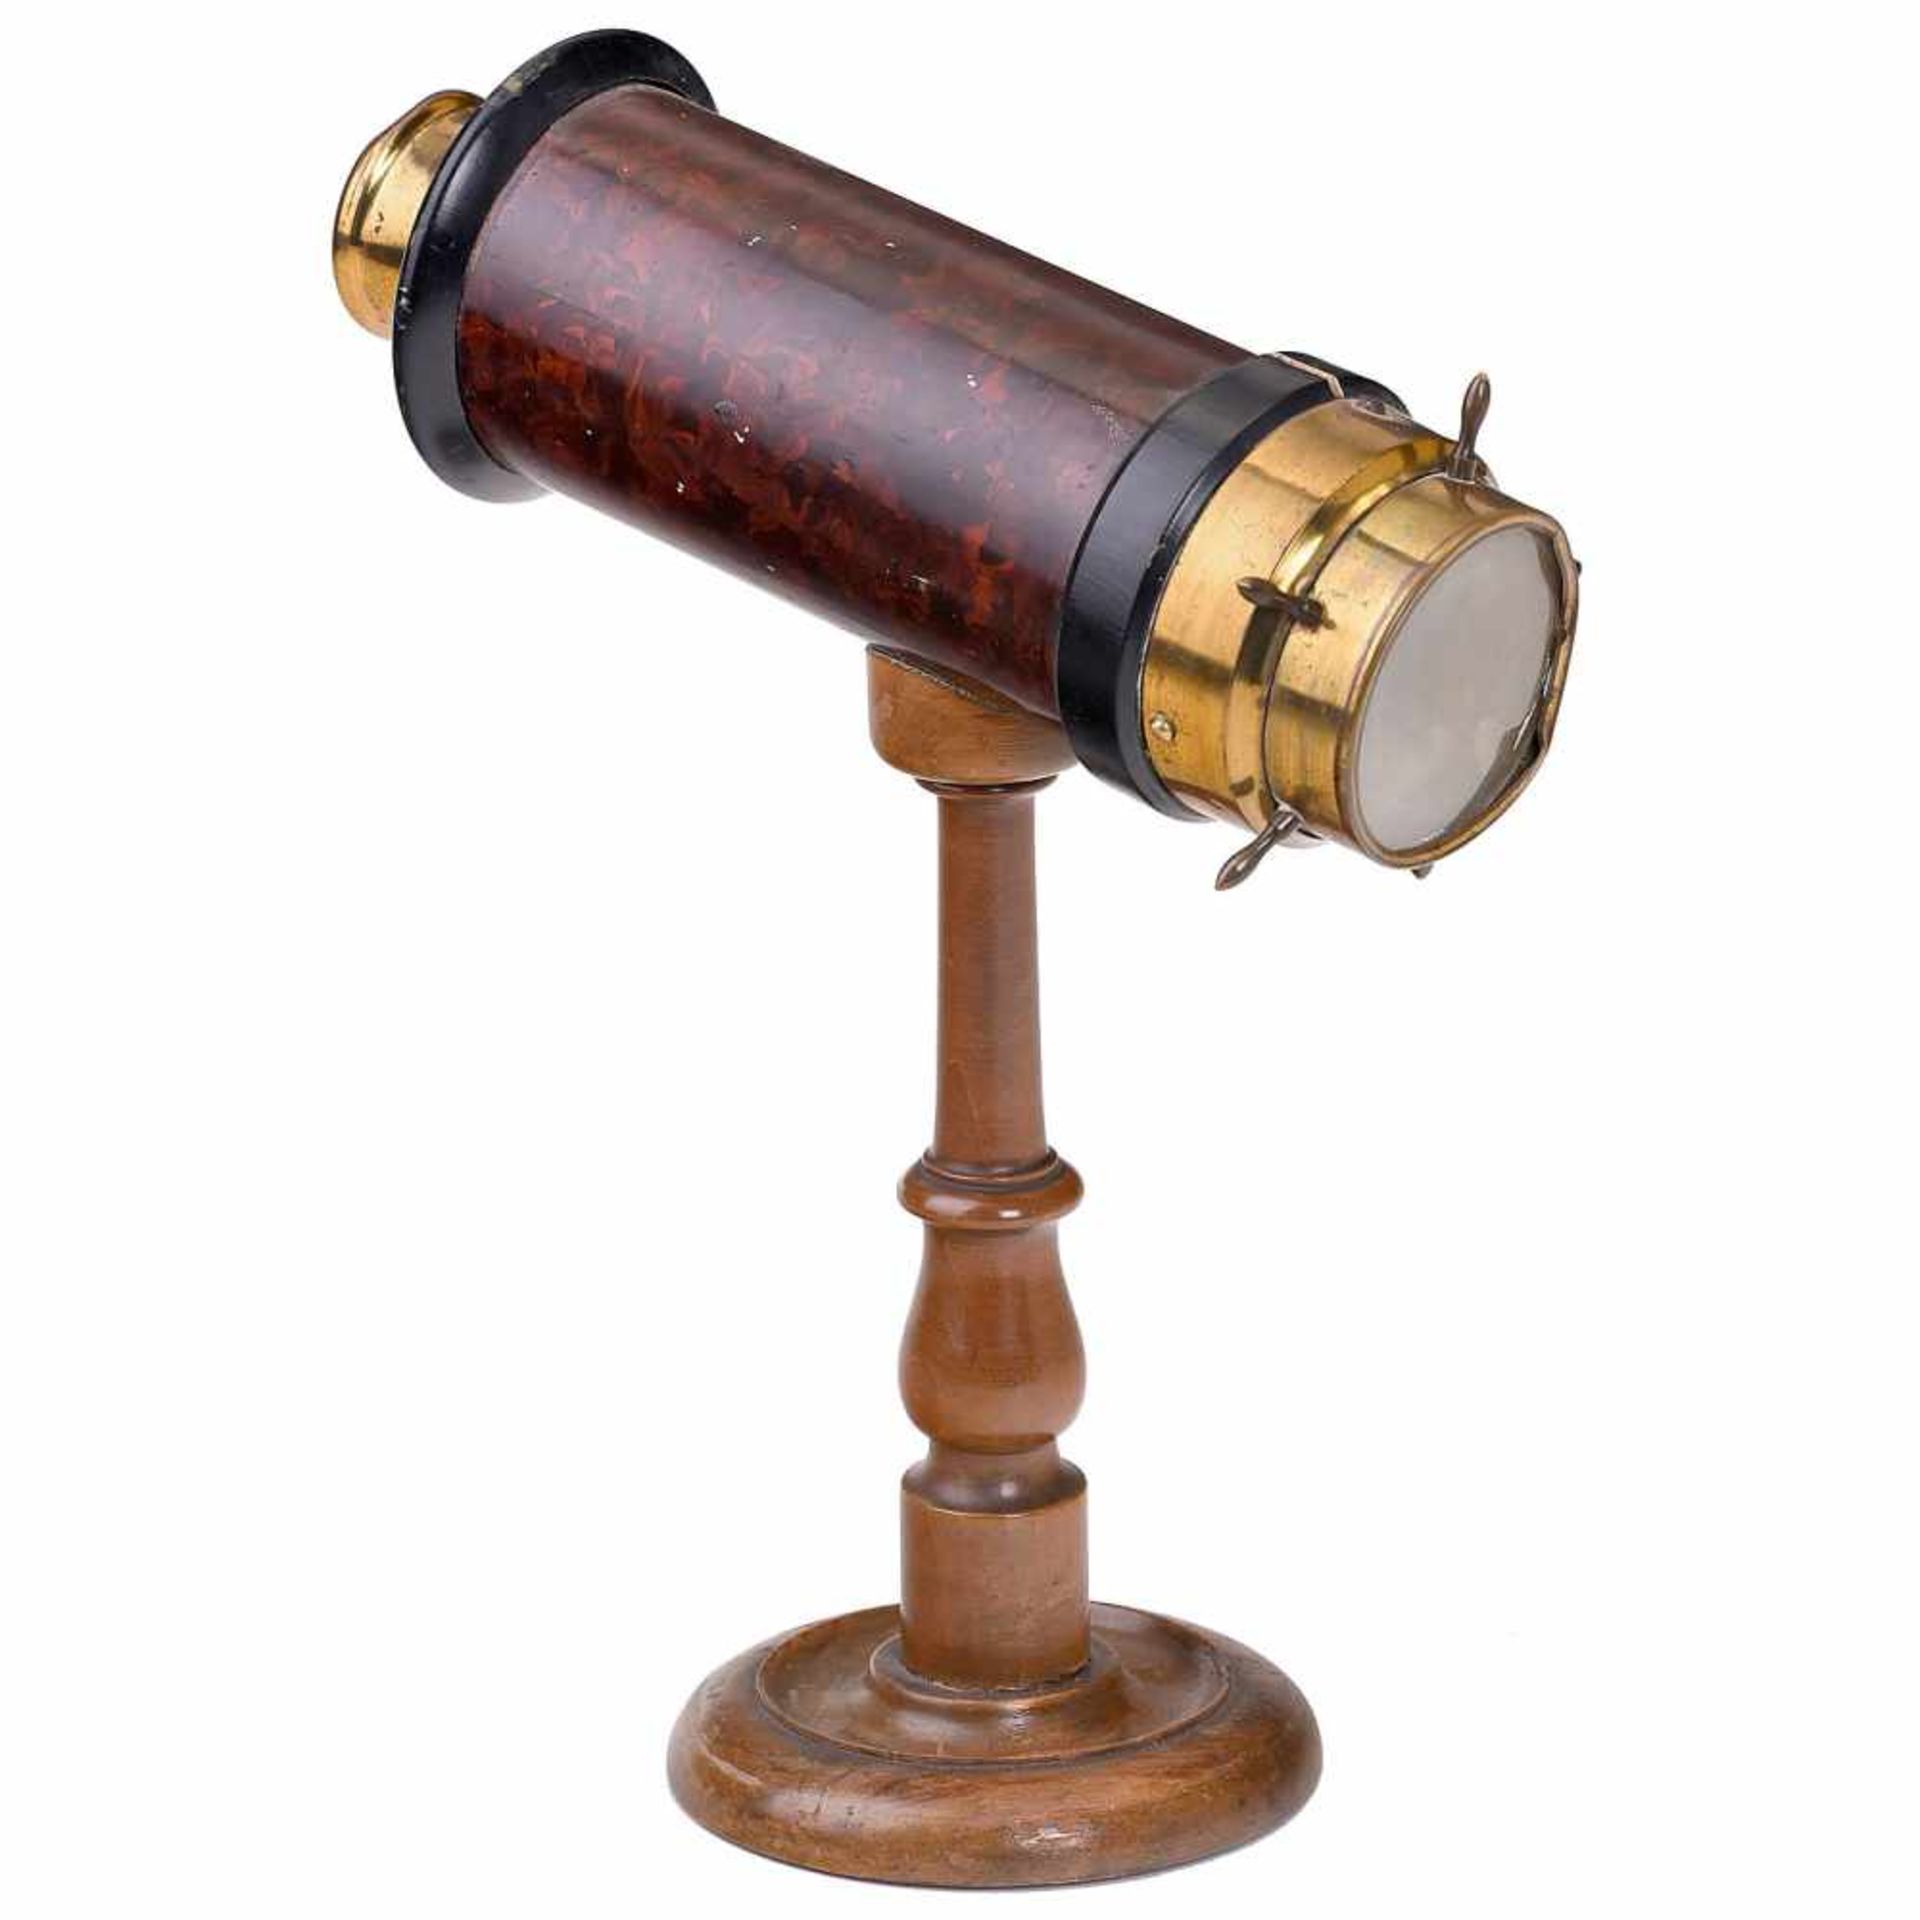 Table Kaleidoscope, c. 1900Unmarked. Bakelite body (or a similar material), transparent finish, on